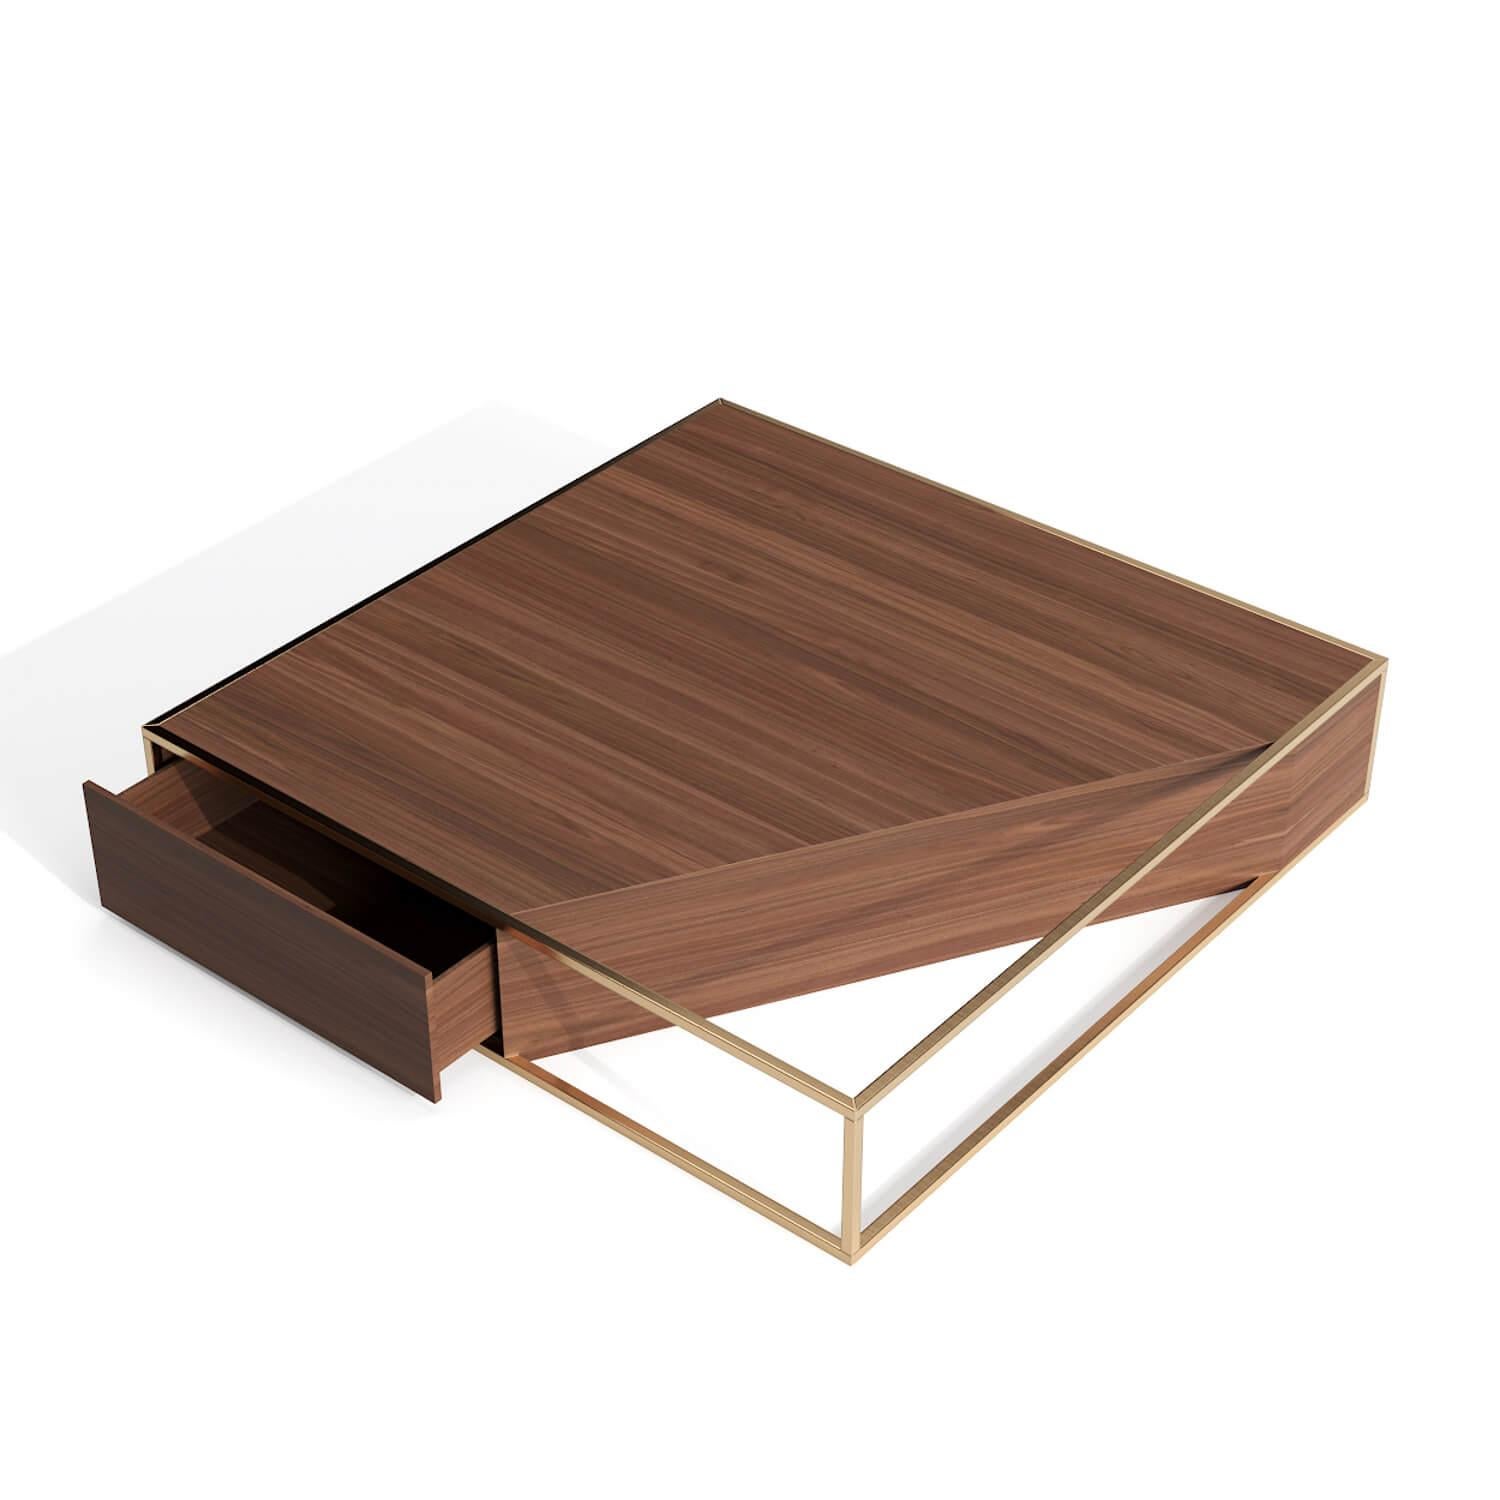 Polished Modern Minimalist Square Center Coffee Table in Walnut Wood and Brushed Brass For Sale